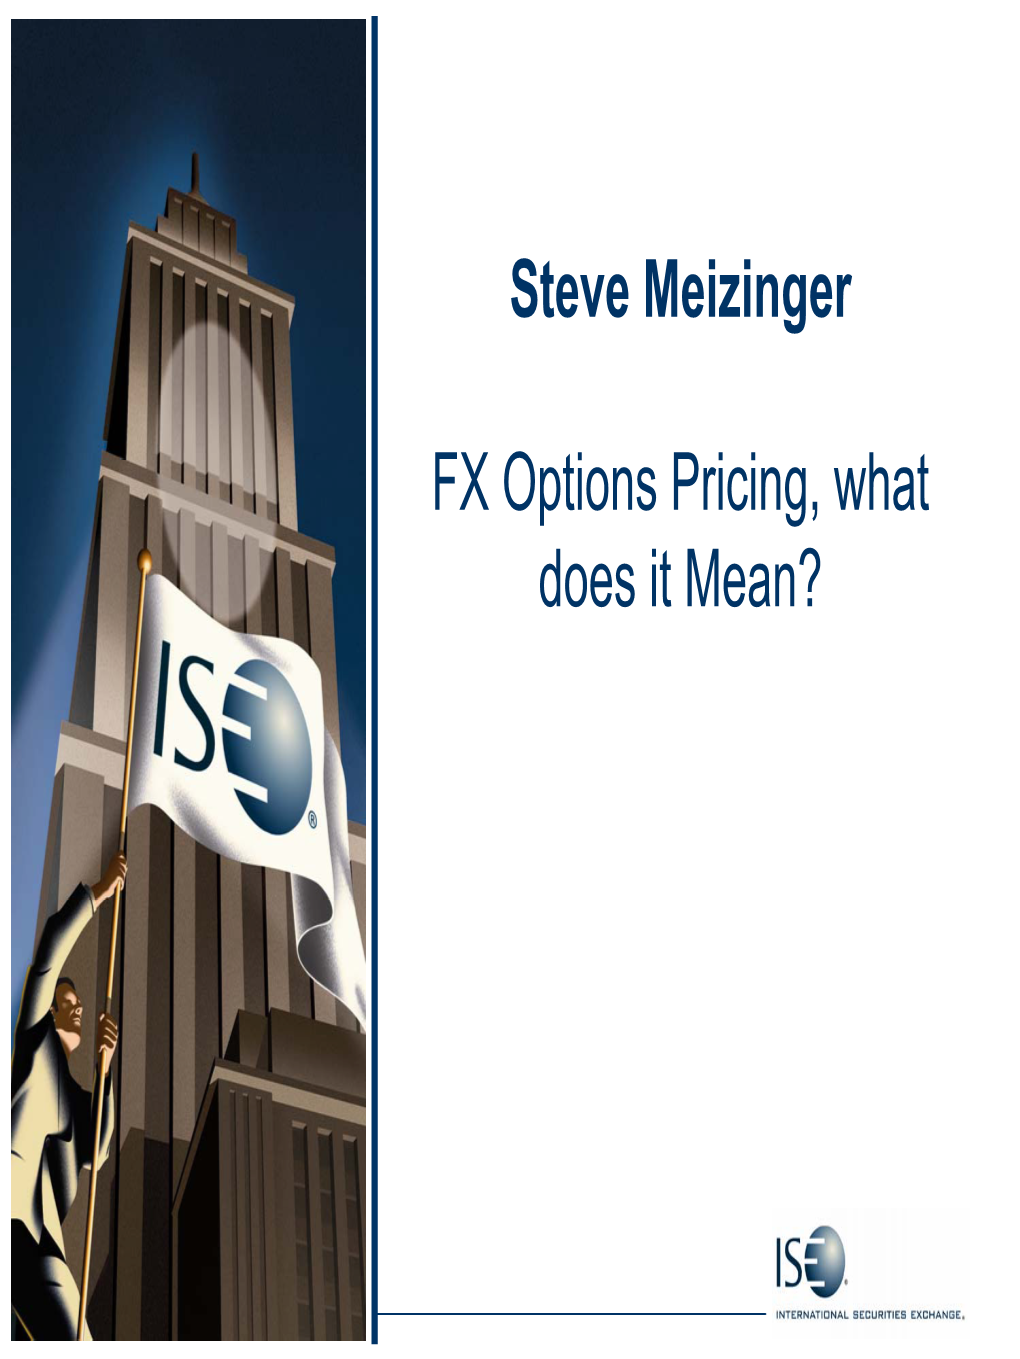 Steve Meizinger FX Options Pricing, What Does It Mean?